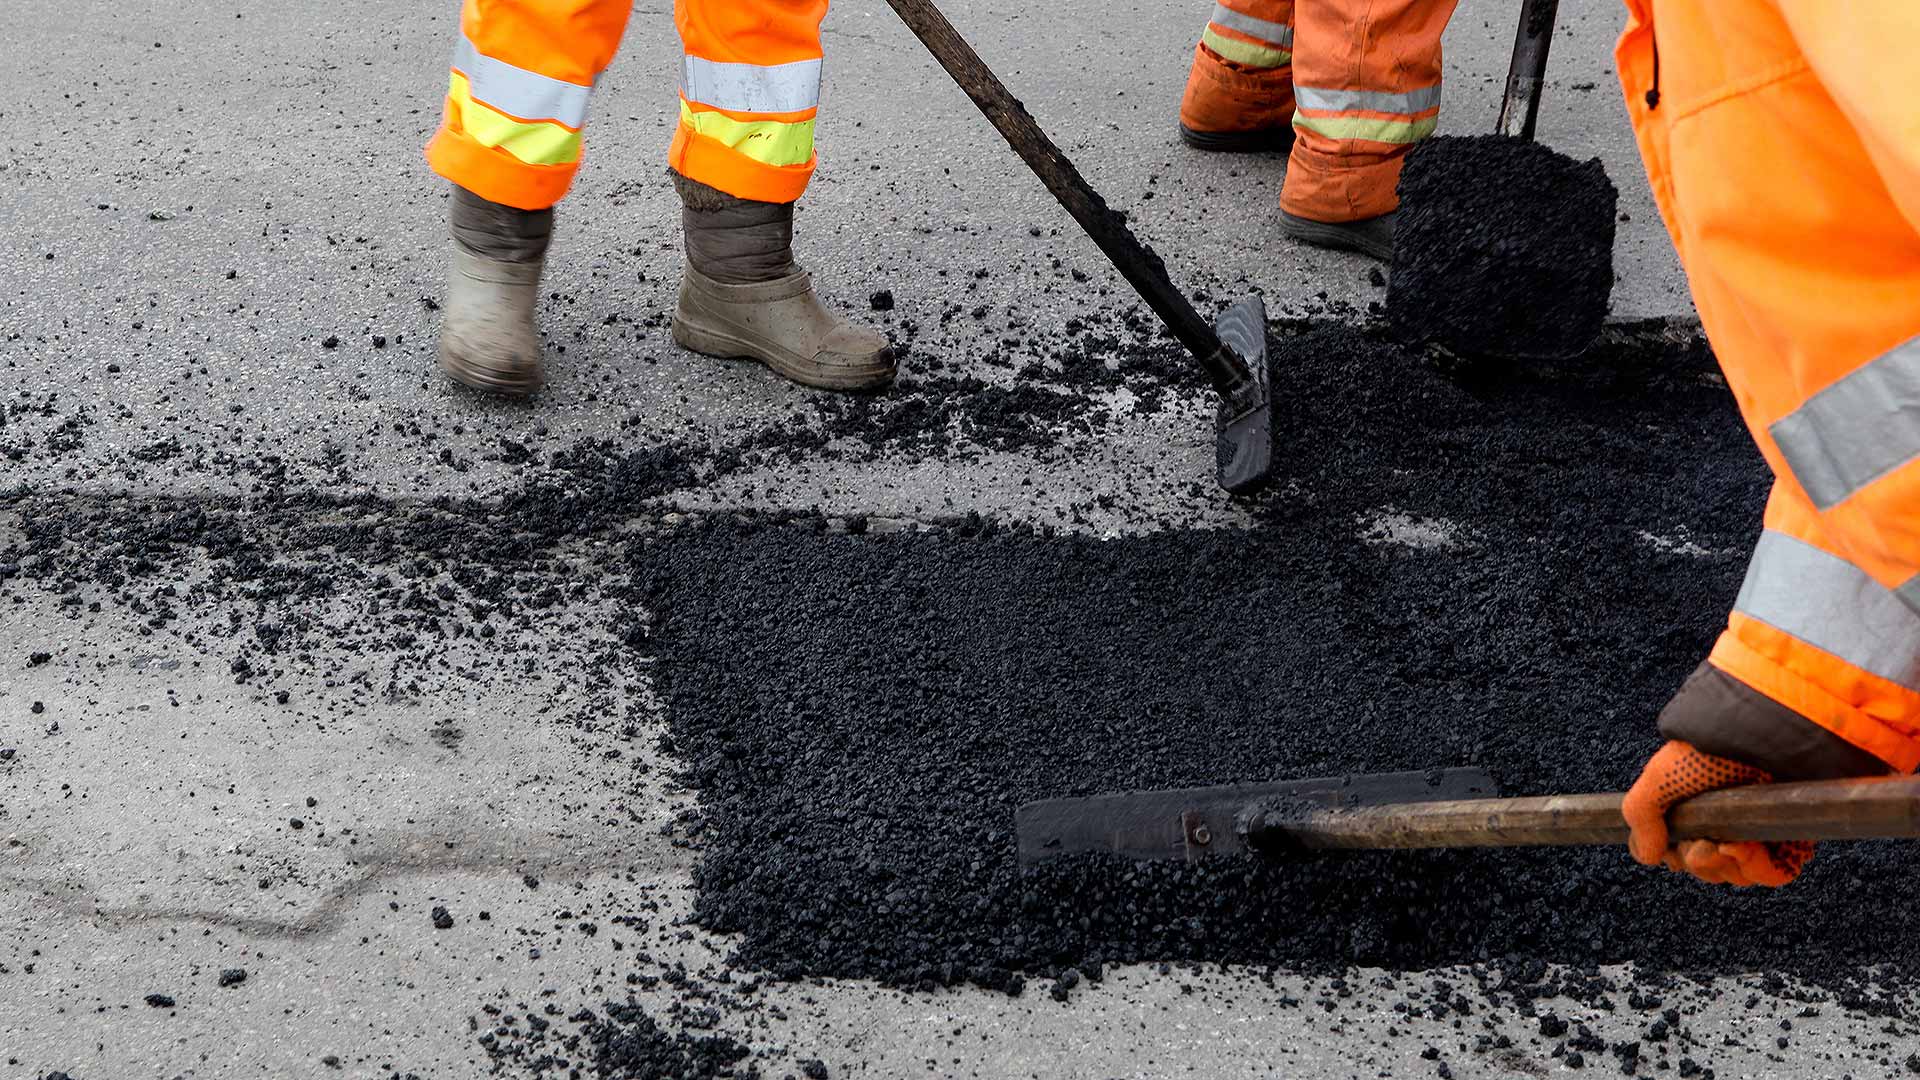 Road workers fixing a pothole